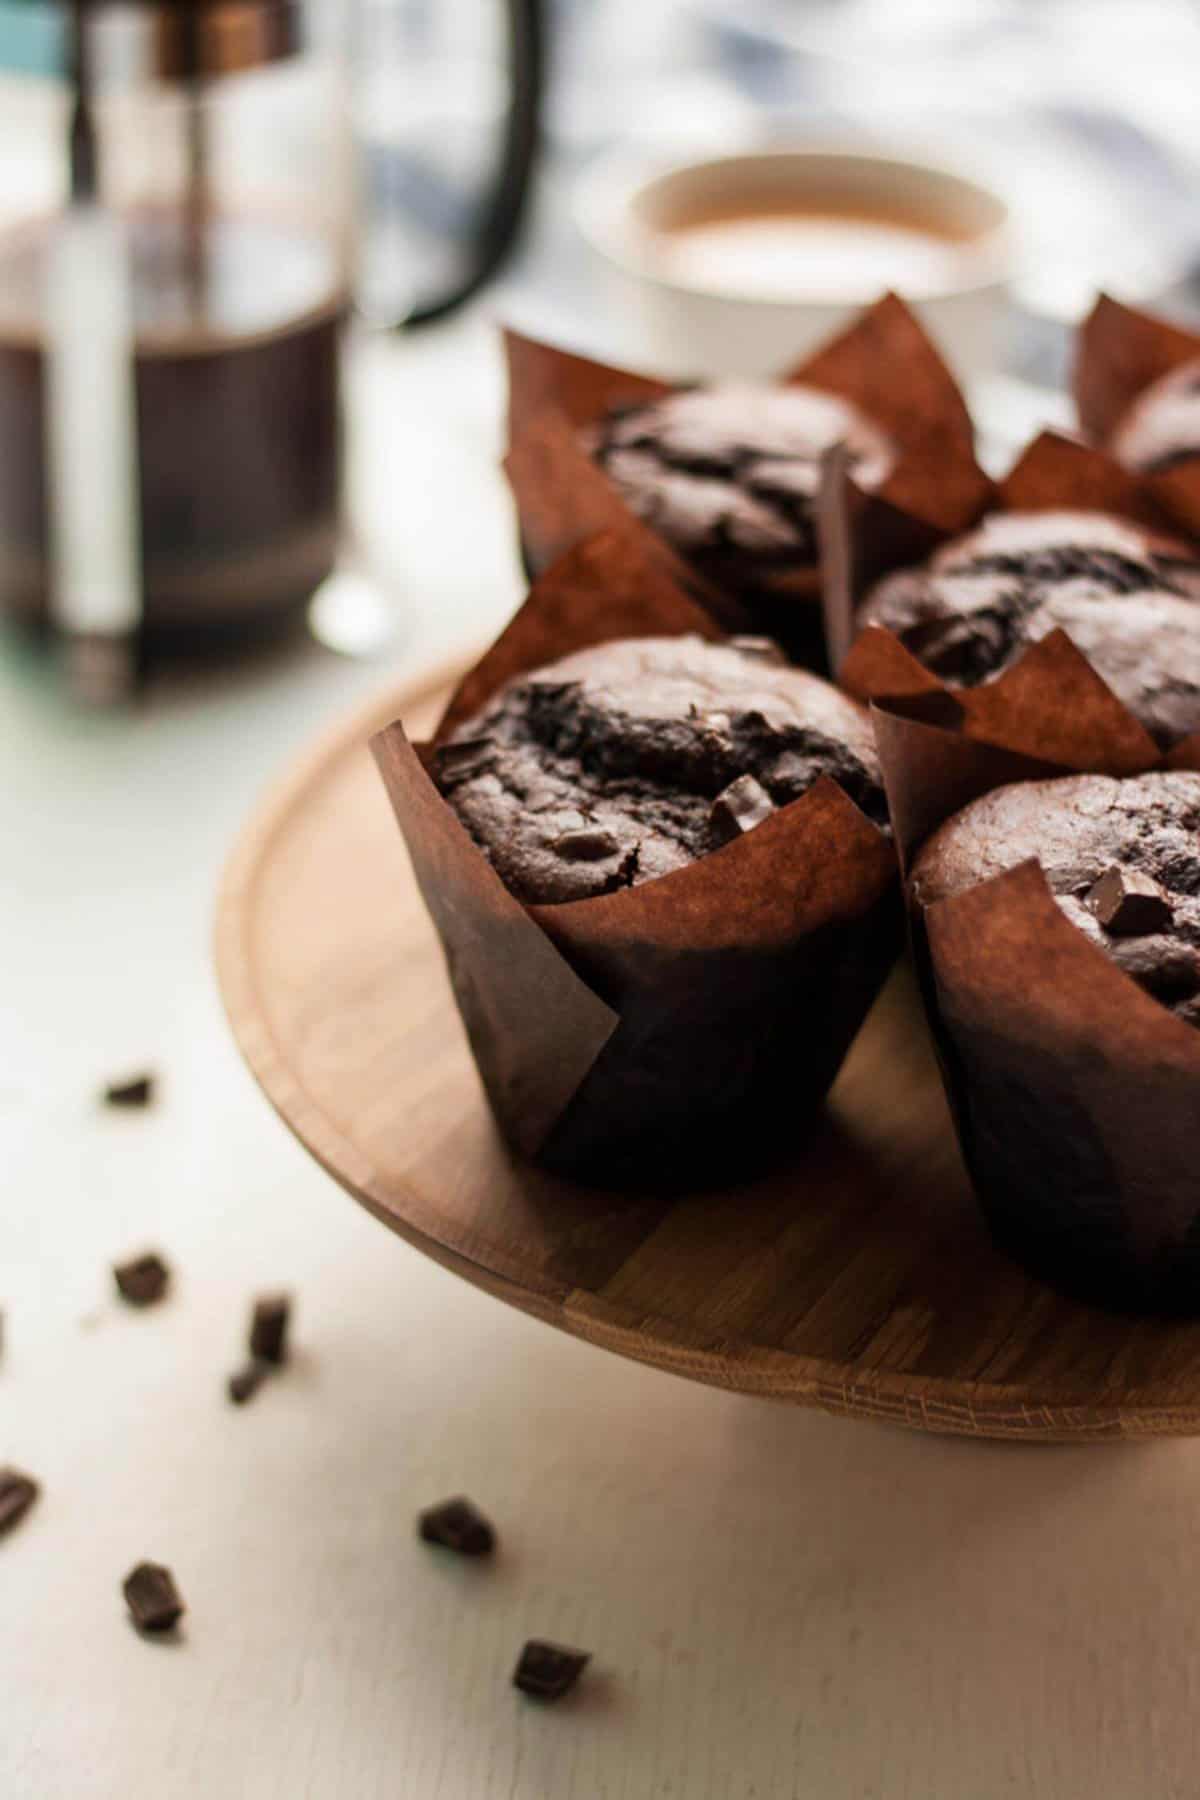 Four chocolate sweet potato muffins on top of a wooden cake stand with a cafetiere.